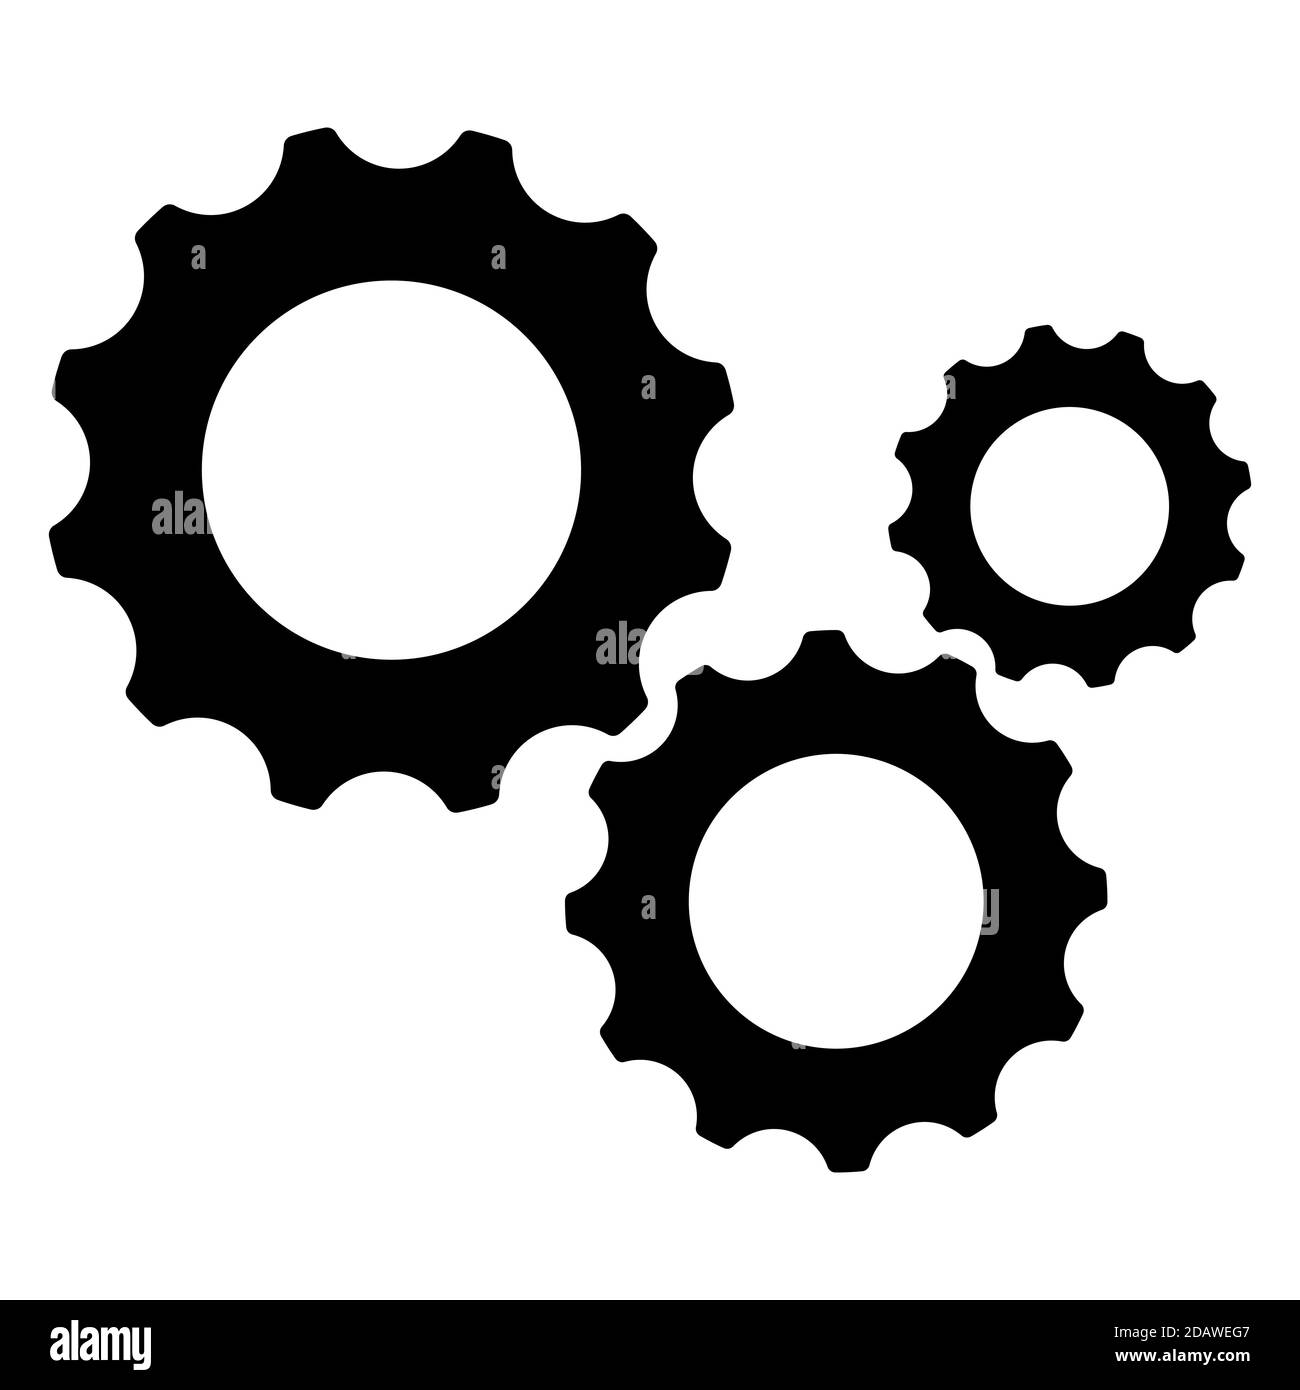 Gear Vector Icon. Continuous running gear Concept of organizational movement. EPS 10 Stock Vector